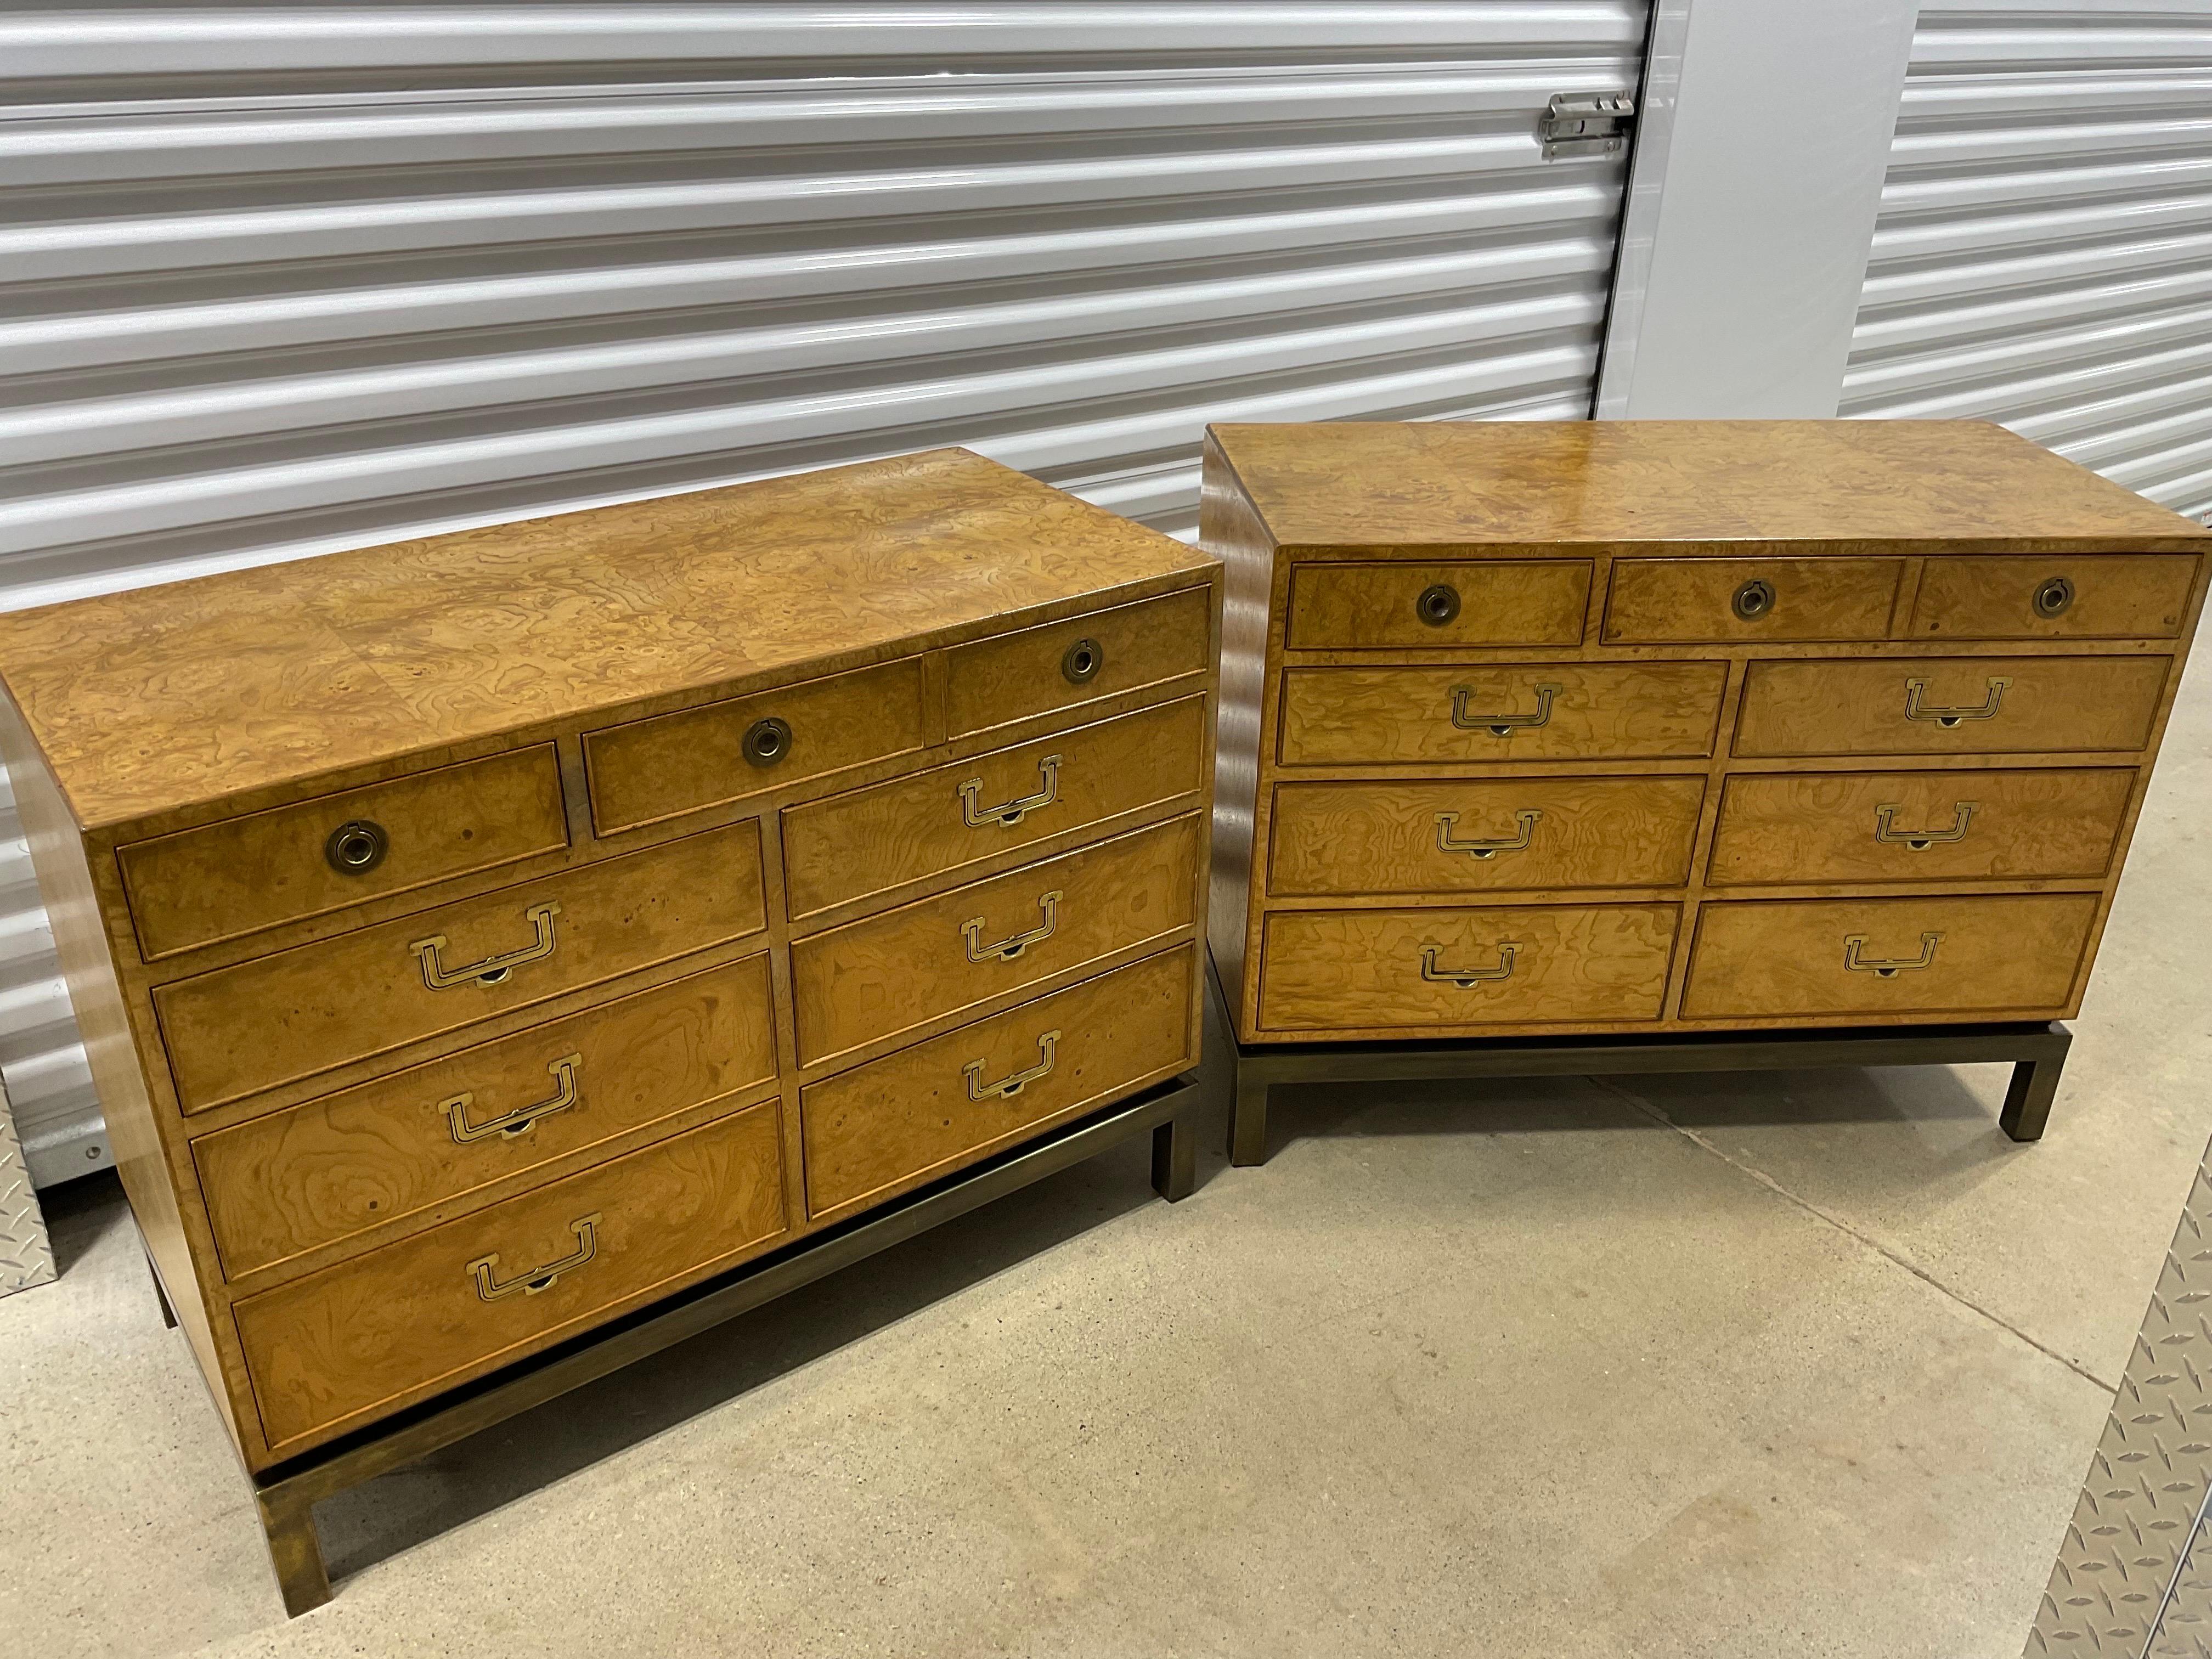 Extraordinary in every way. Uber Rare 1950’s Burled Wood Bachelor Chests from John Widdicomb. 

Condition Disclosure:
Please understand nearly all of our inventory is comprised of rare to very rare vintage pieces. They are not new and may have some